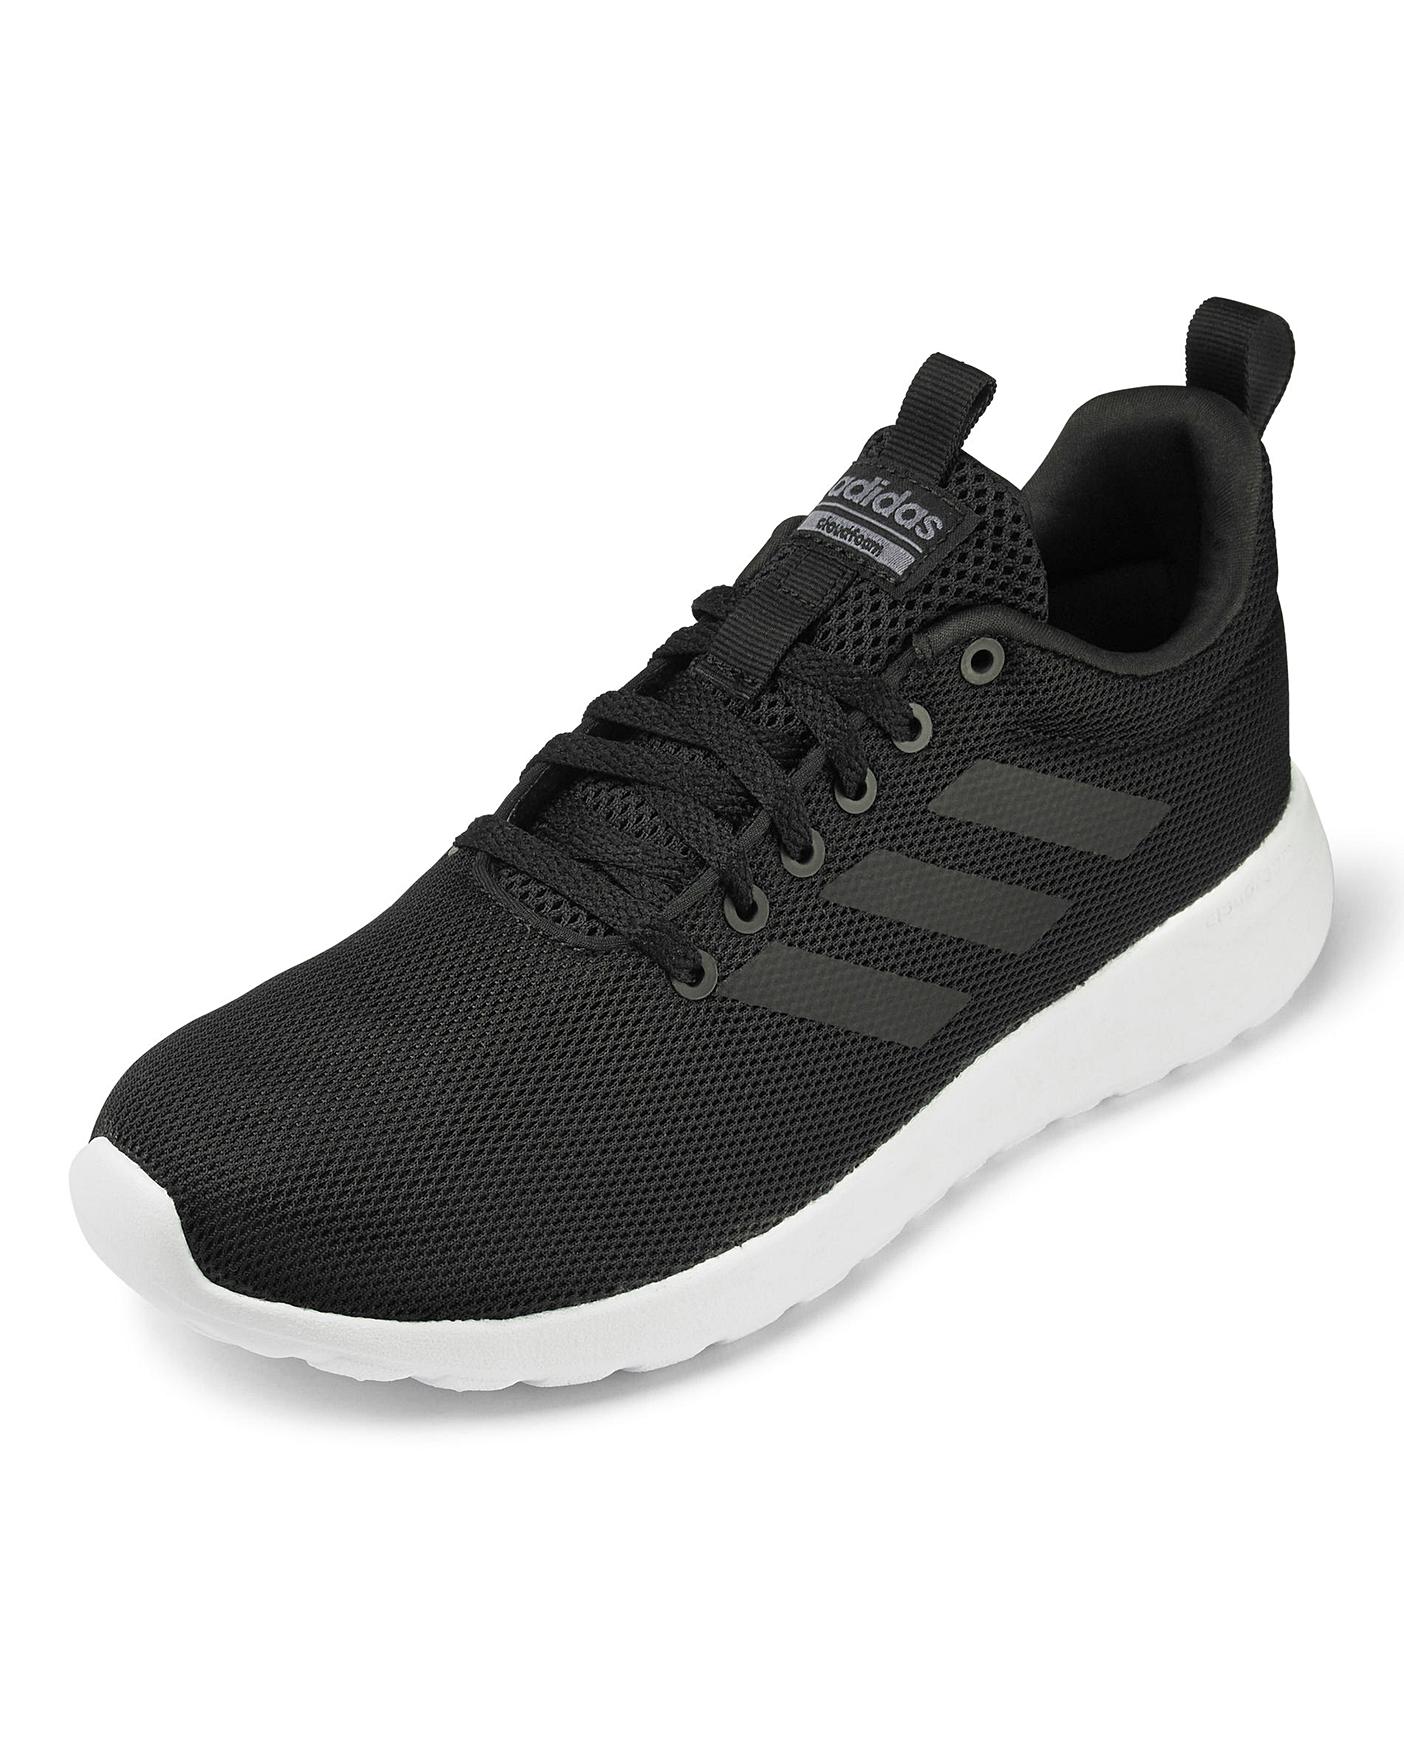 adidas lite racer clean trainers